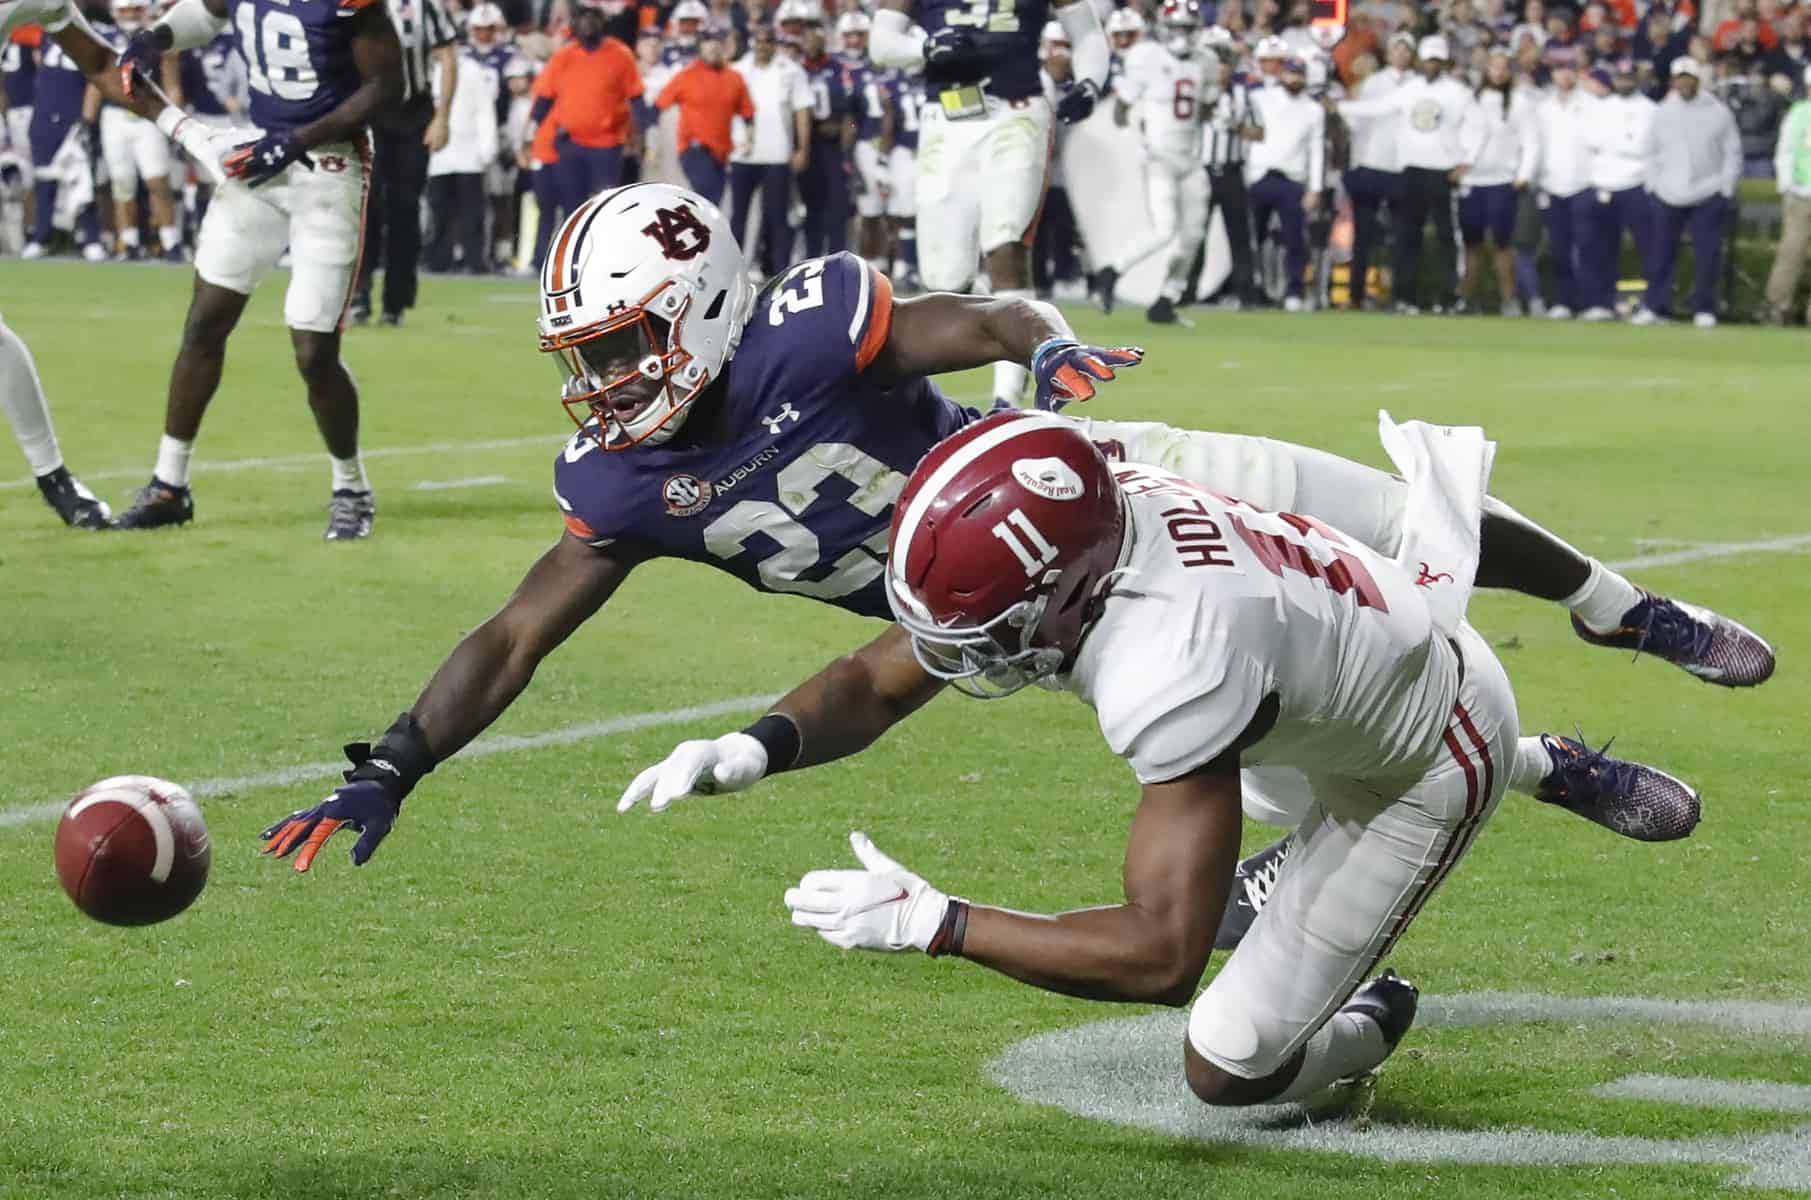 Auburn 2022 NFL Draft Scouting Reports includes Smoke Monday and